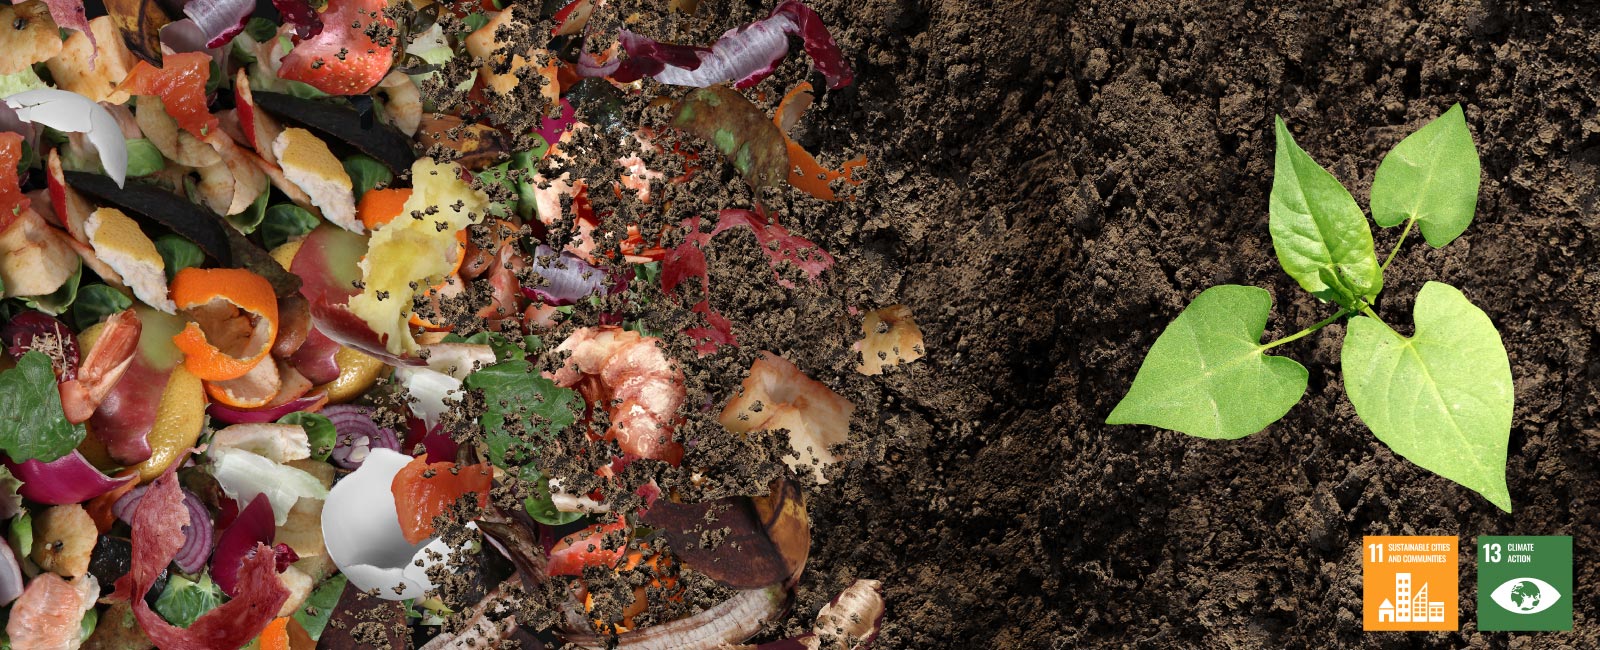 “Krungthai RELIFE” Turns Food Waste into Soil